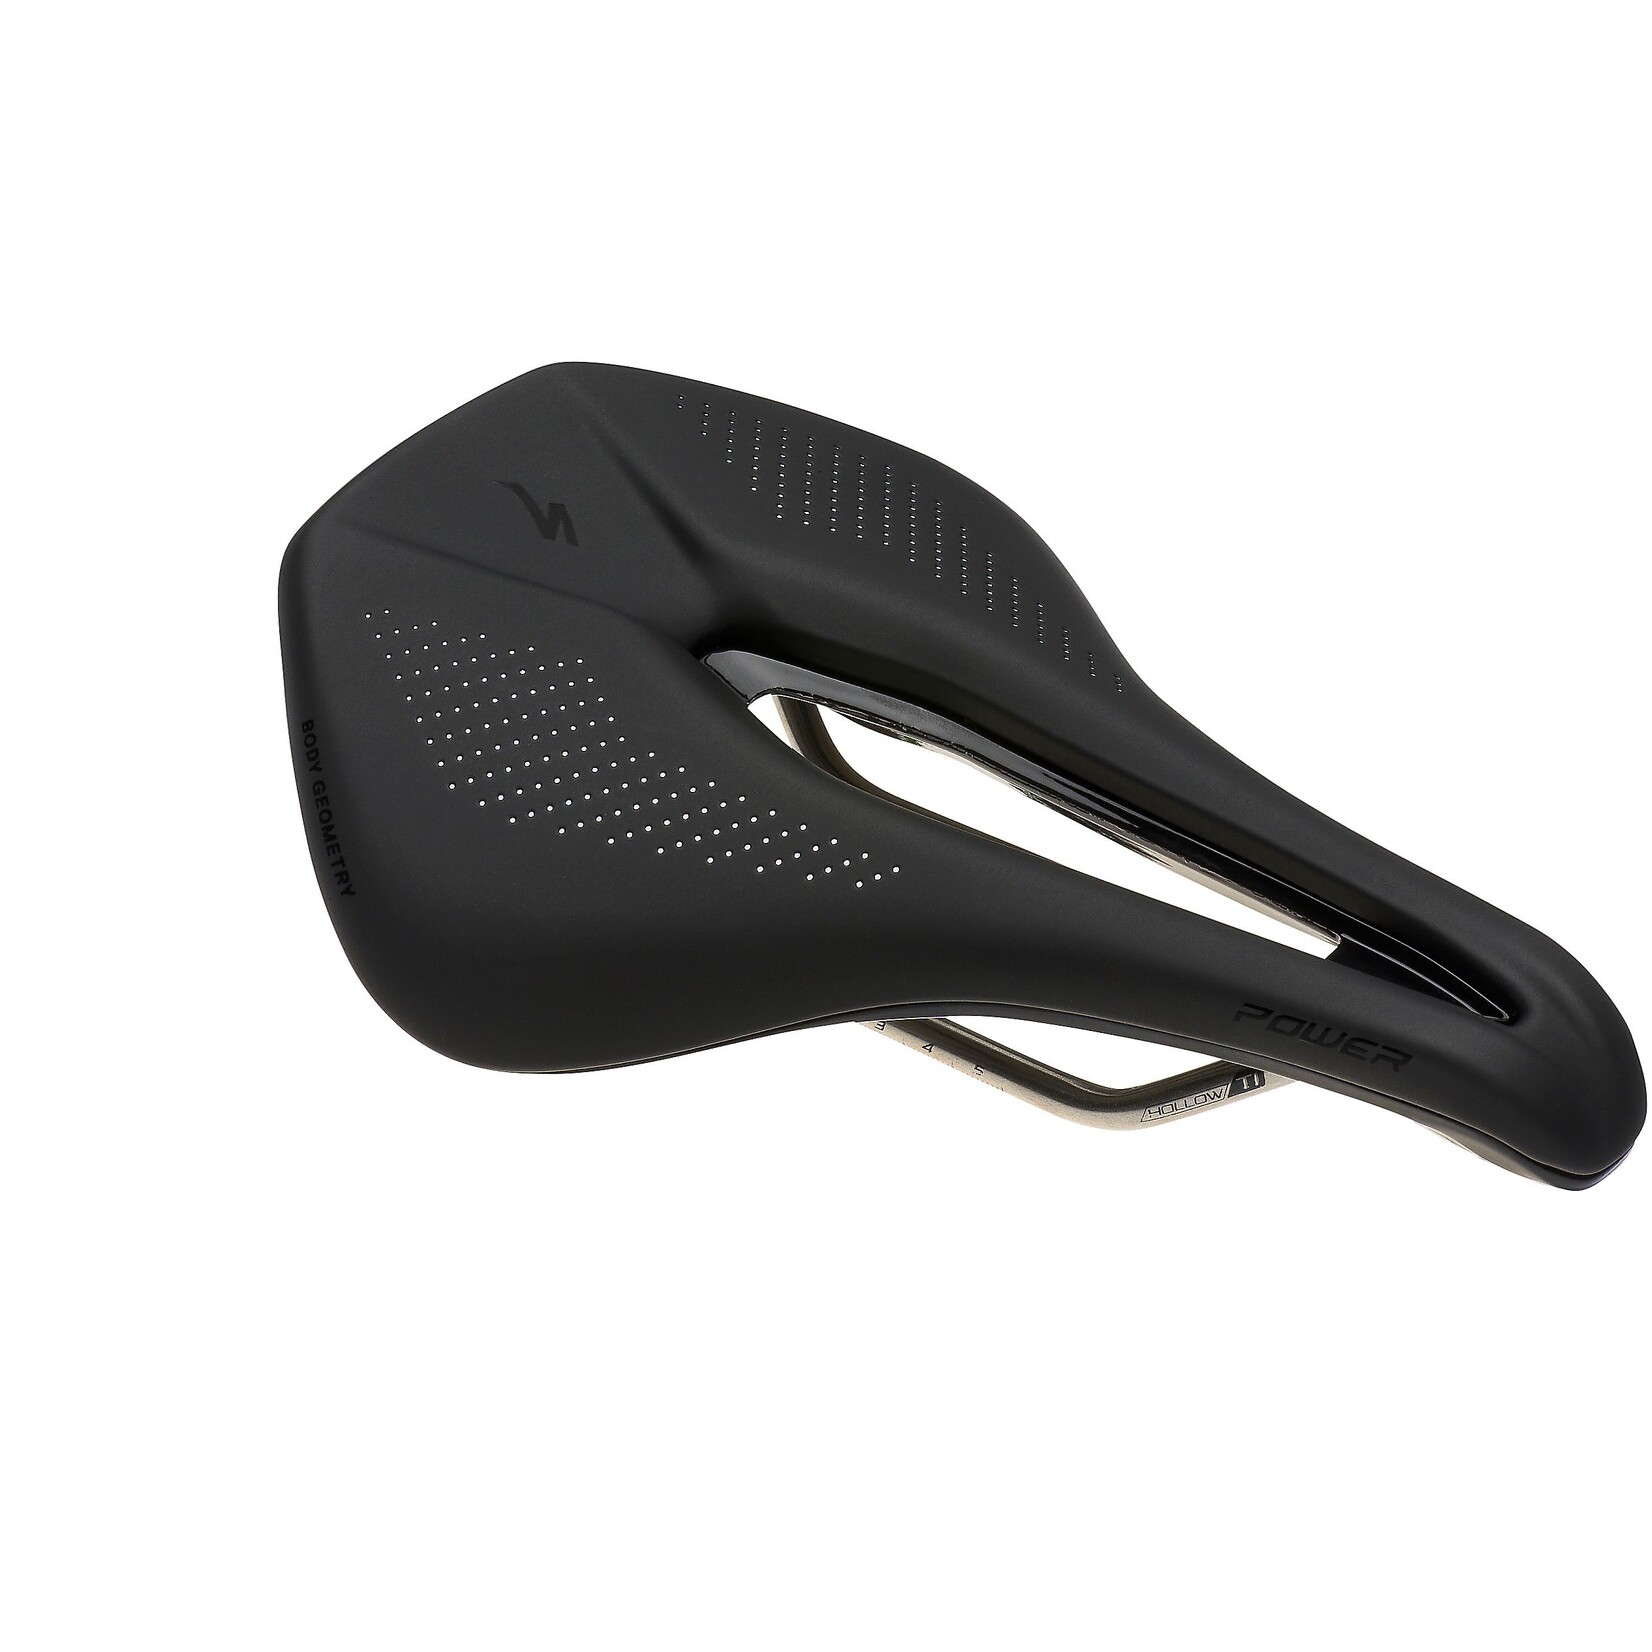 Specialized POWER EXPERT SADDLE BLK 155 155mm